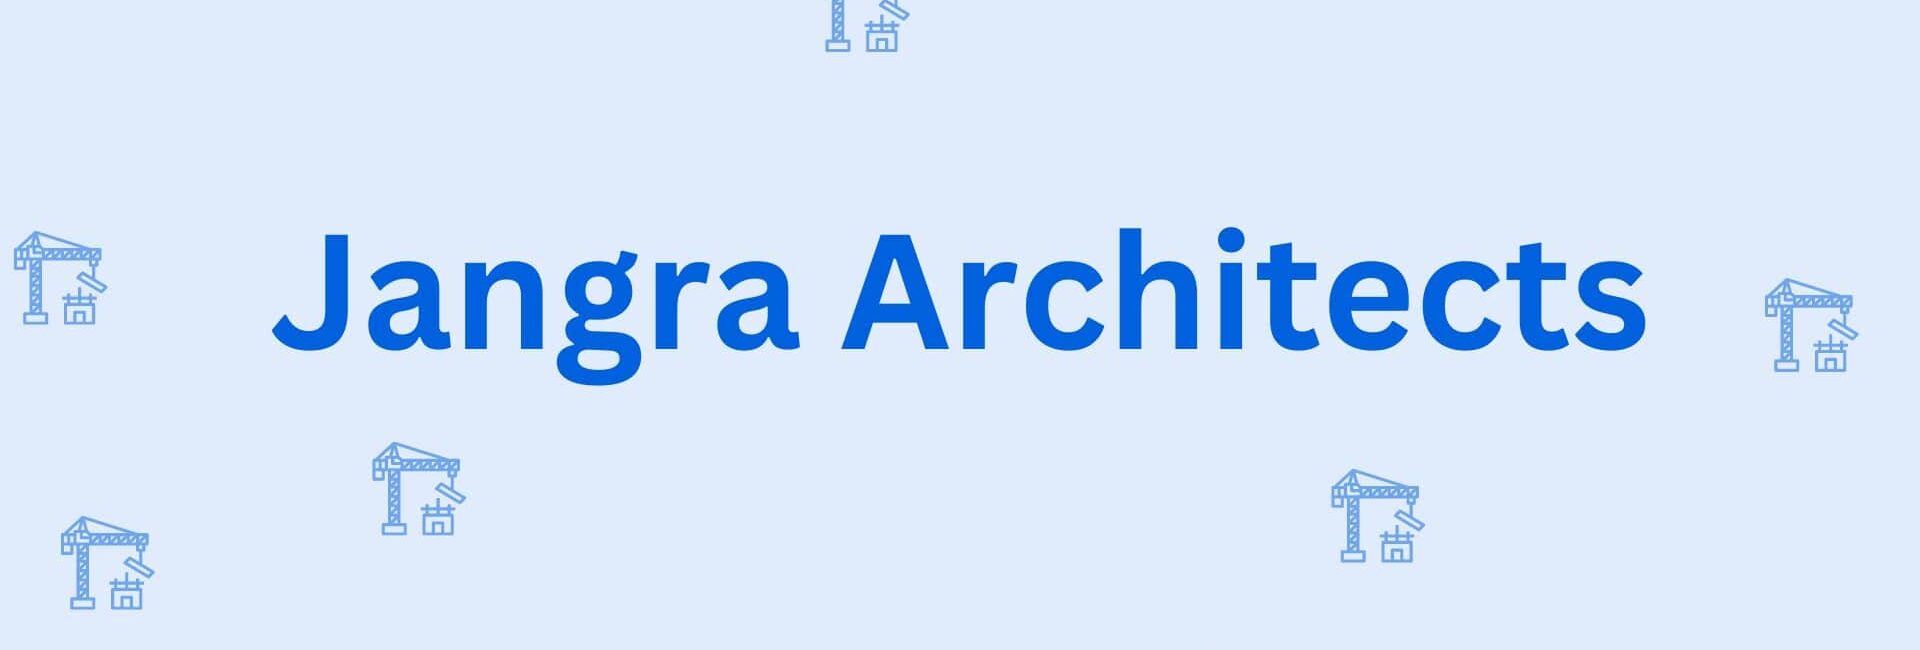 Jangra Architects - Construction Contractor In Hisar-min